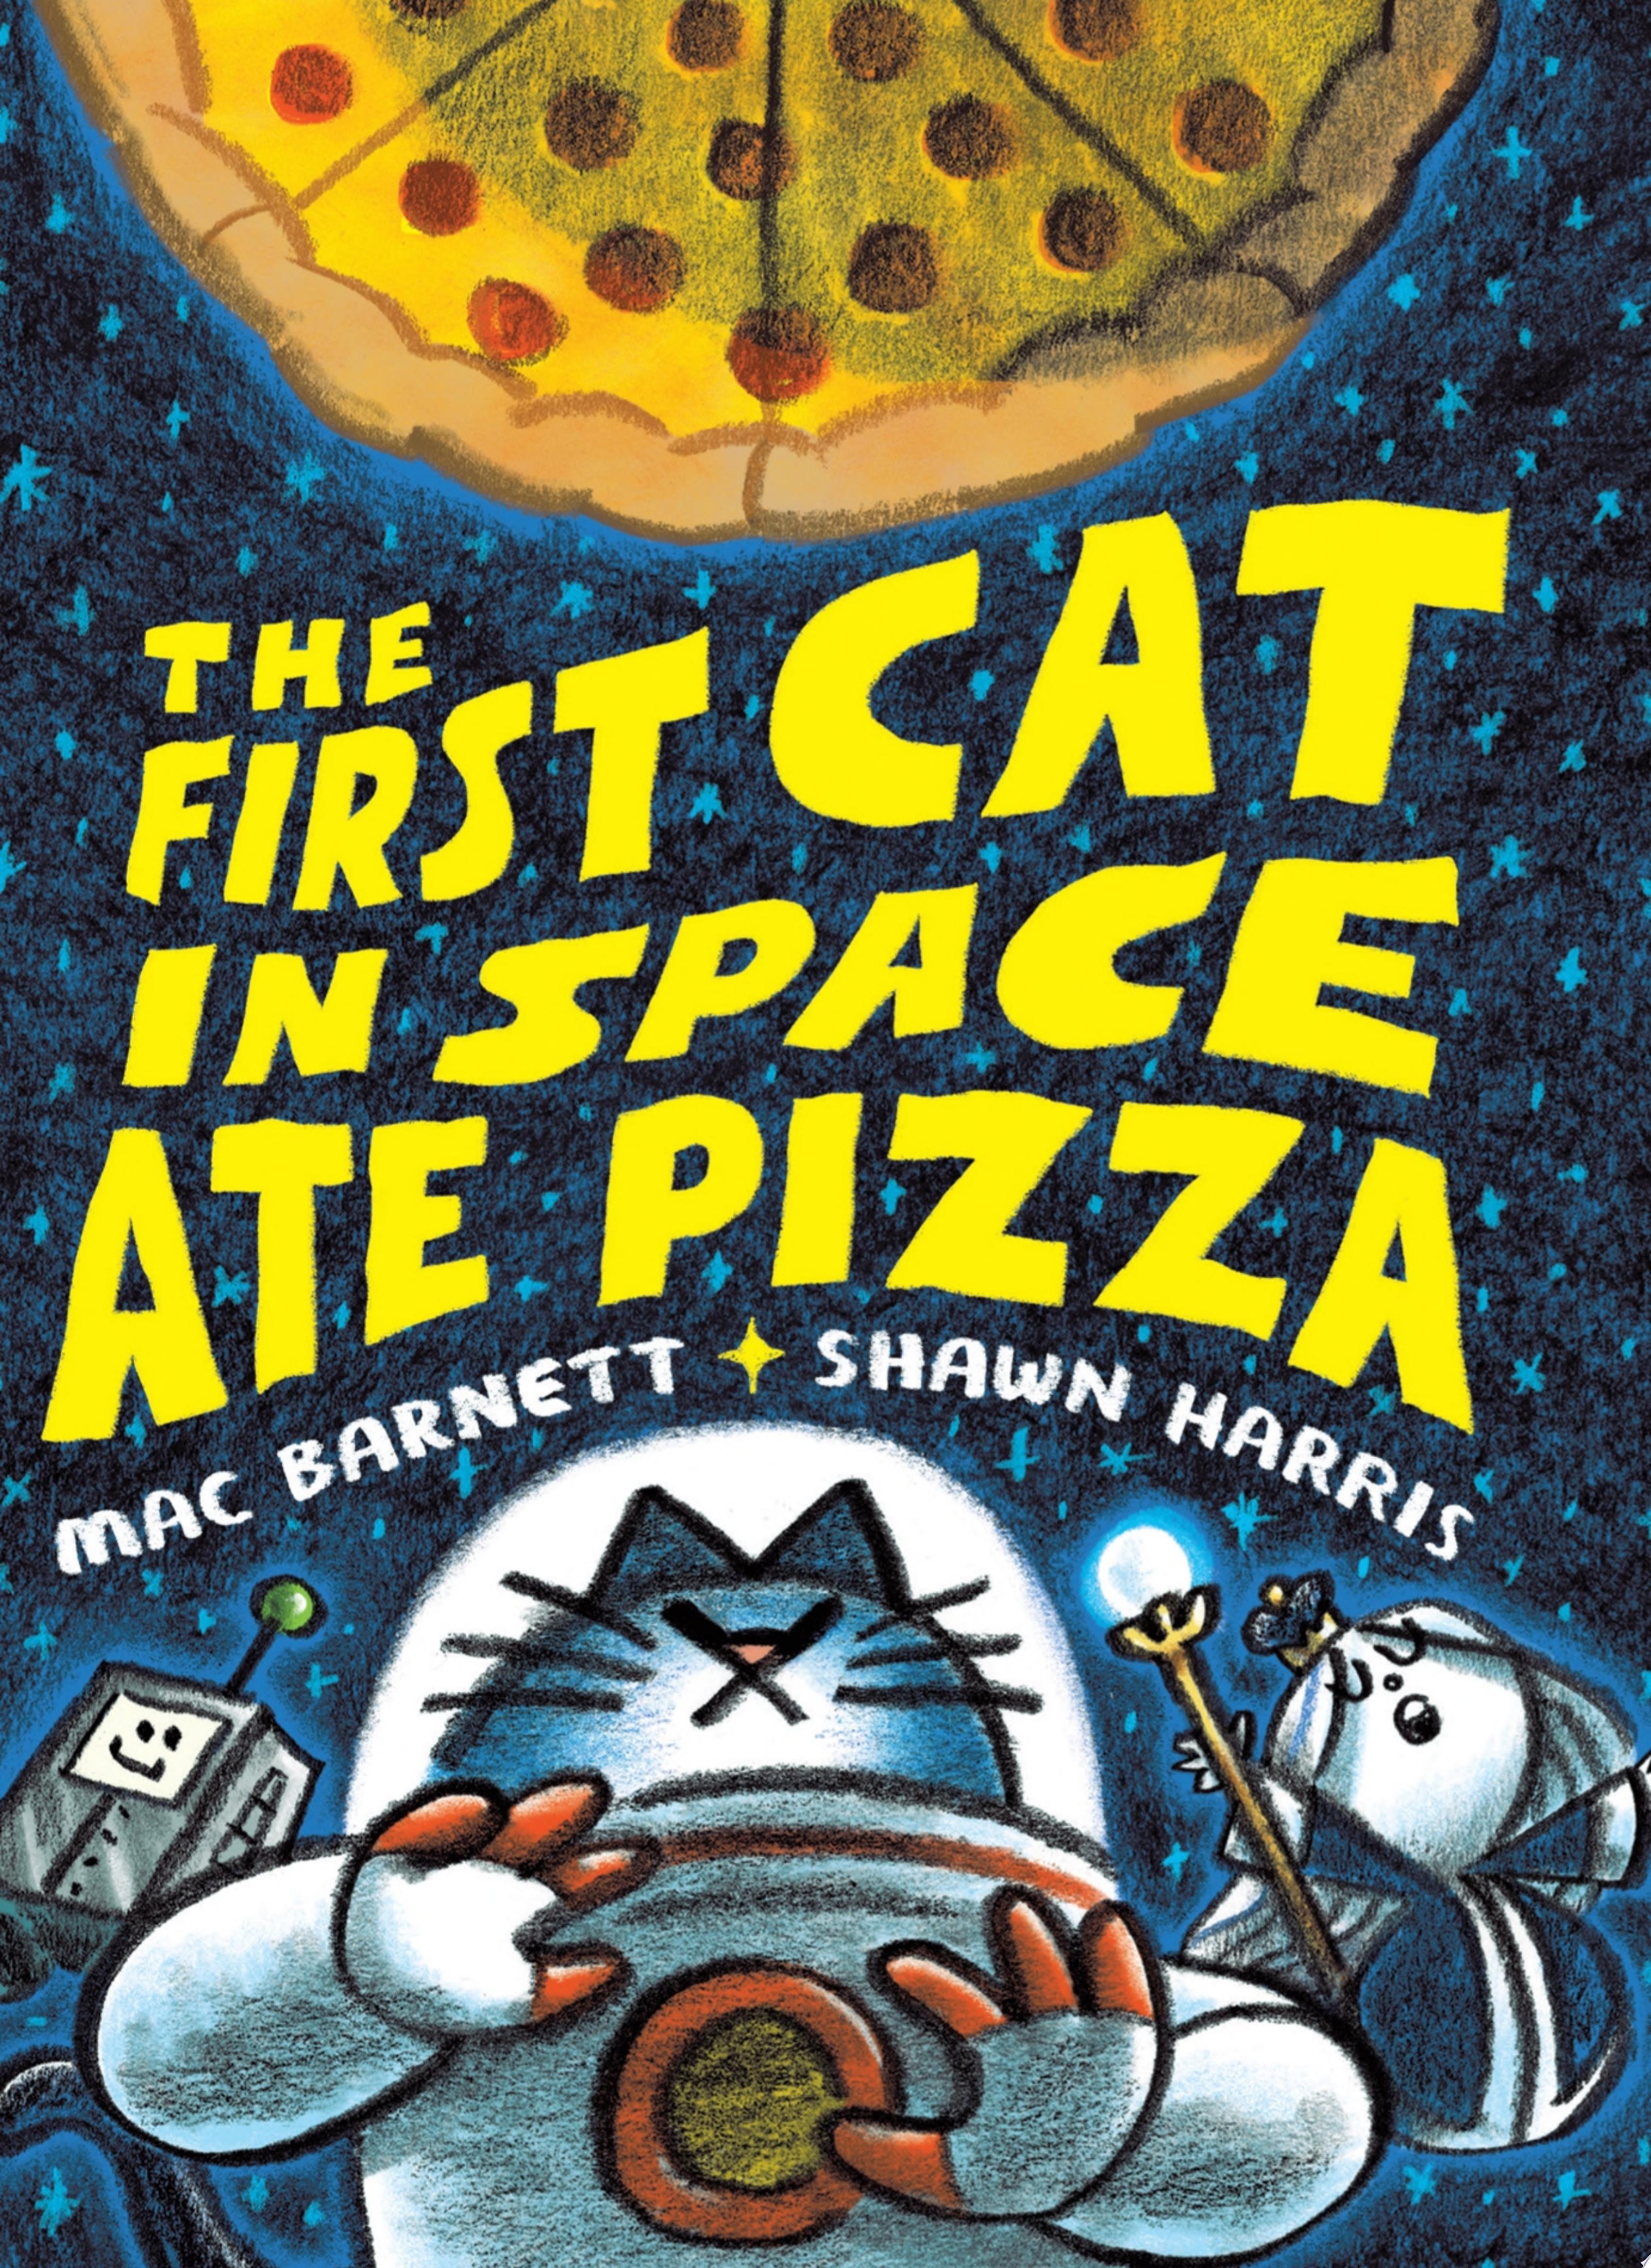 Image for "The First Cat in Space Ate Pizza"